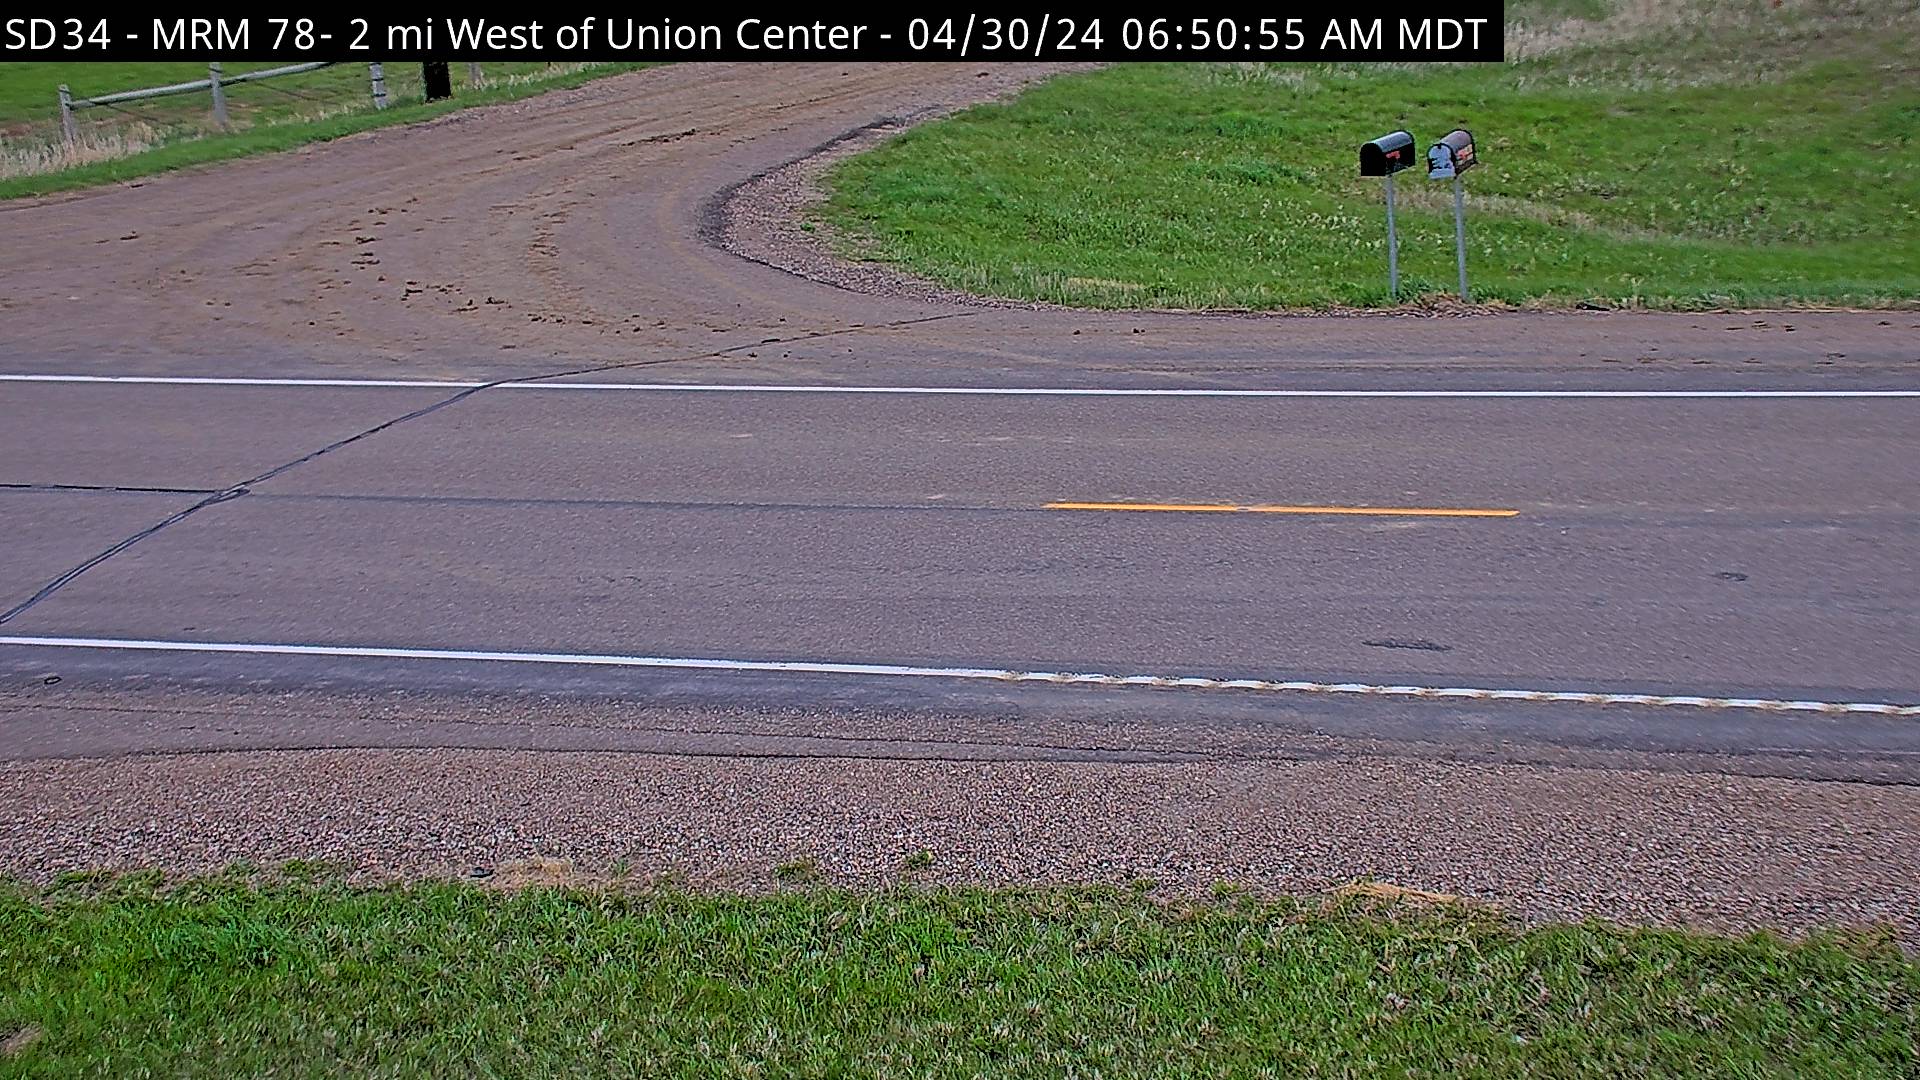 Traffic Cam 2 miles west of town along SD-34 and MP 78 - South Player